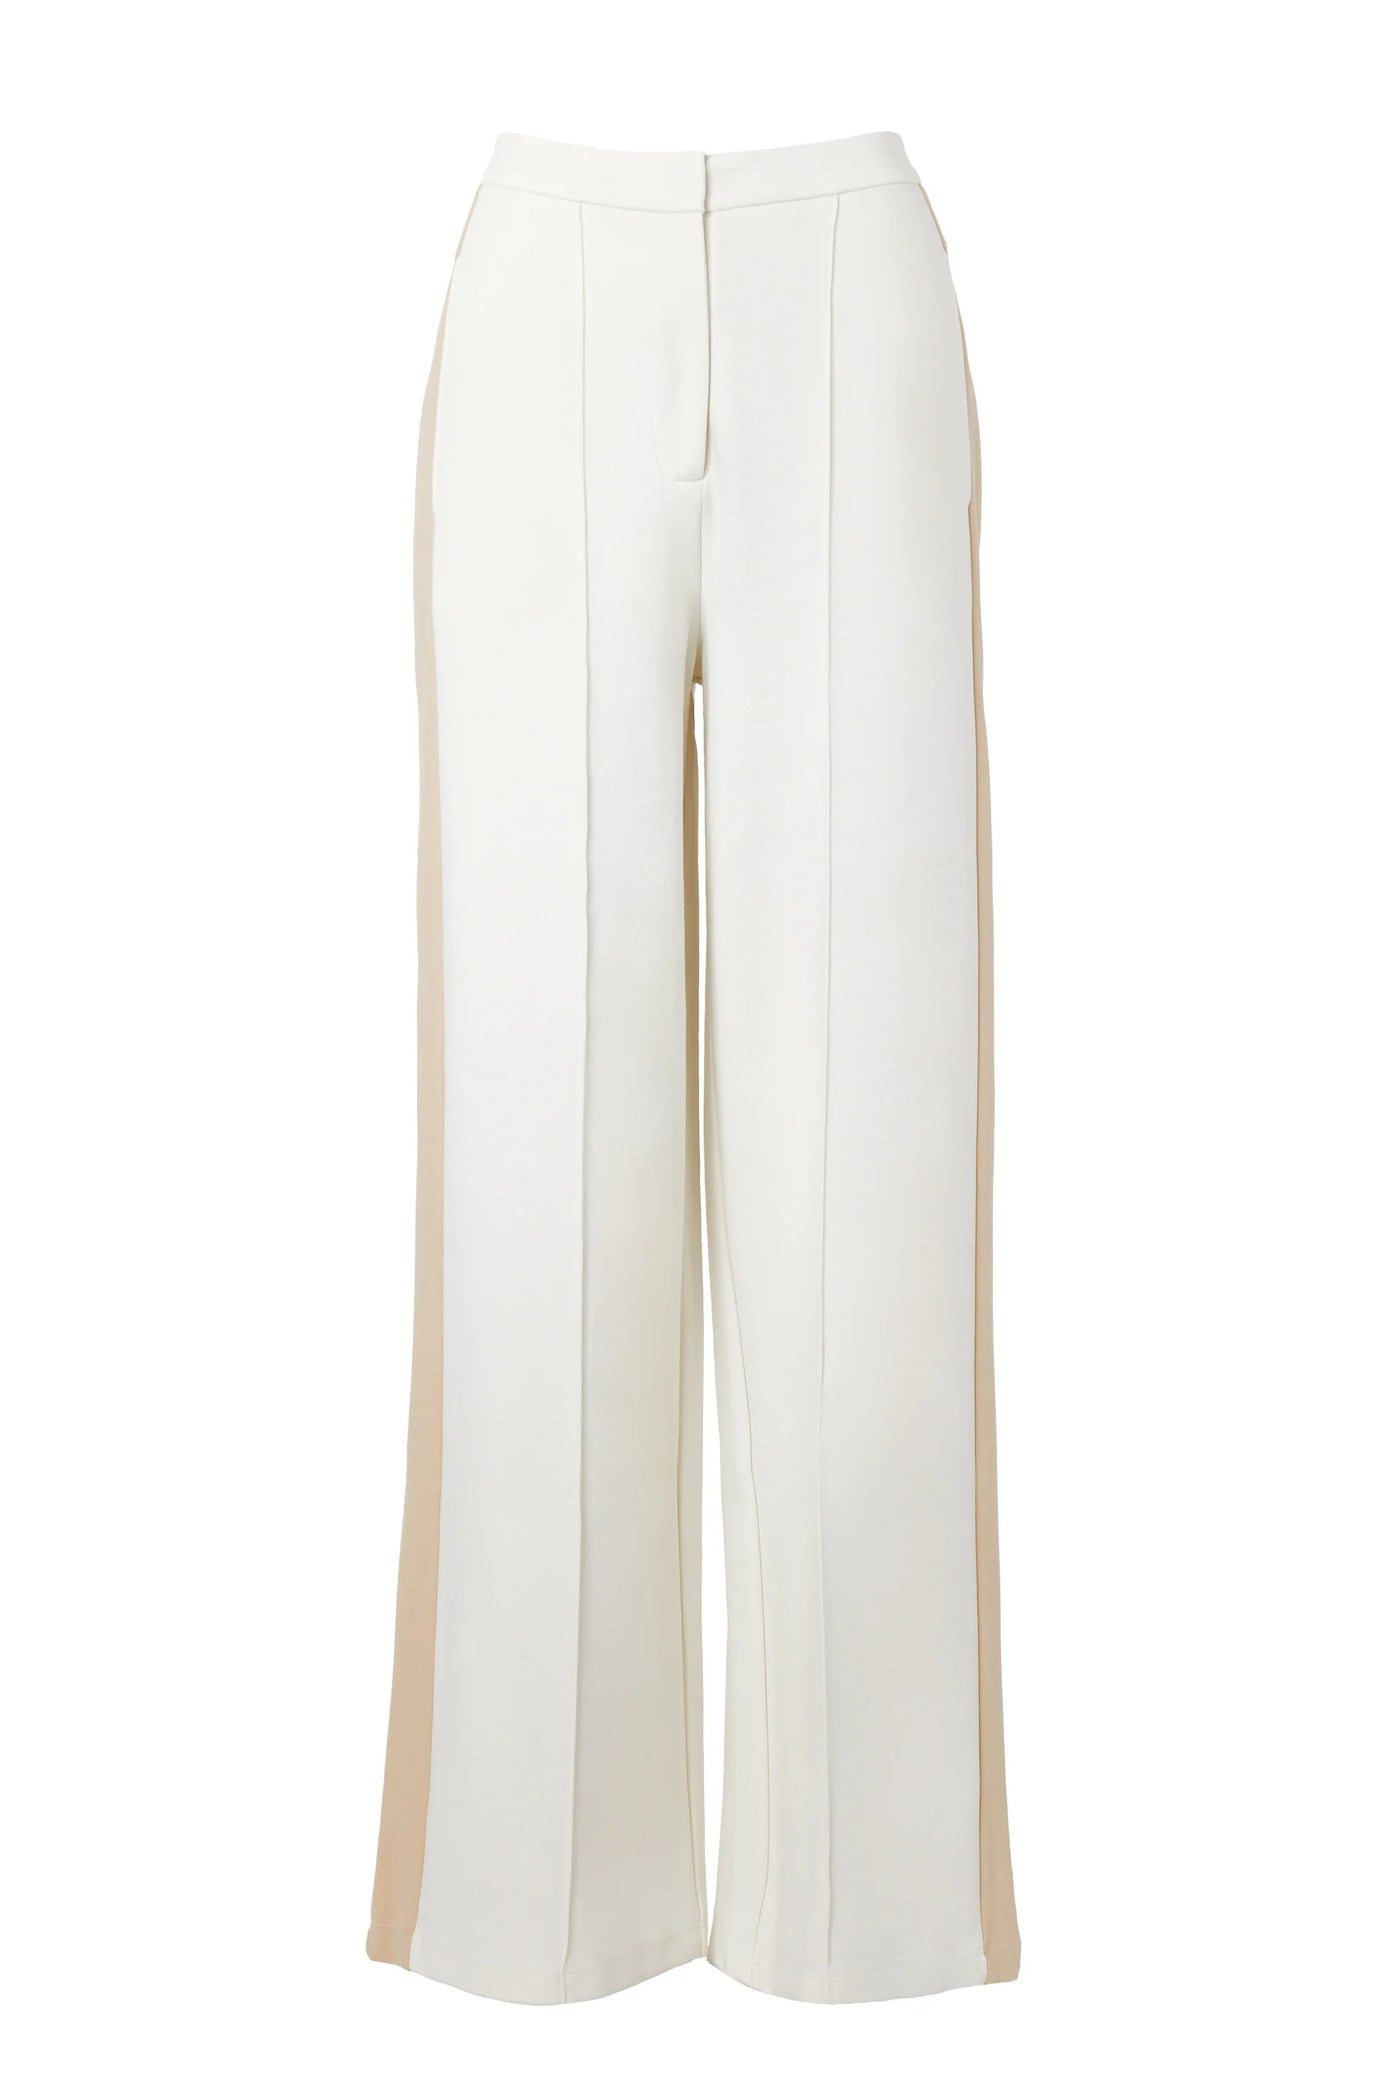 Holland Cooper Wide Leg Pant in Natural Front